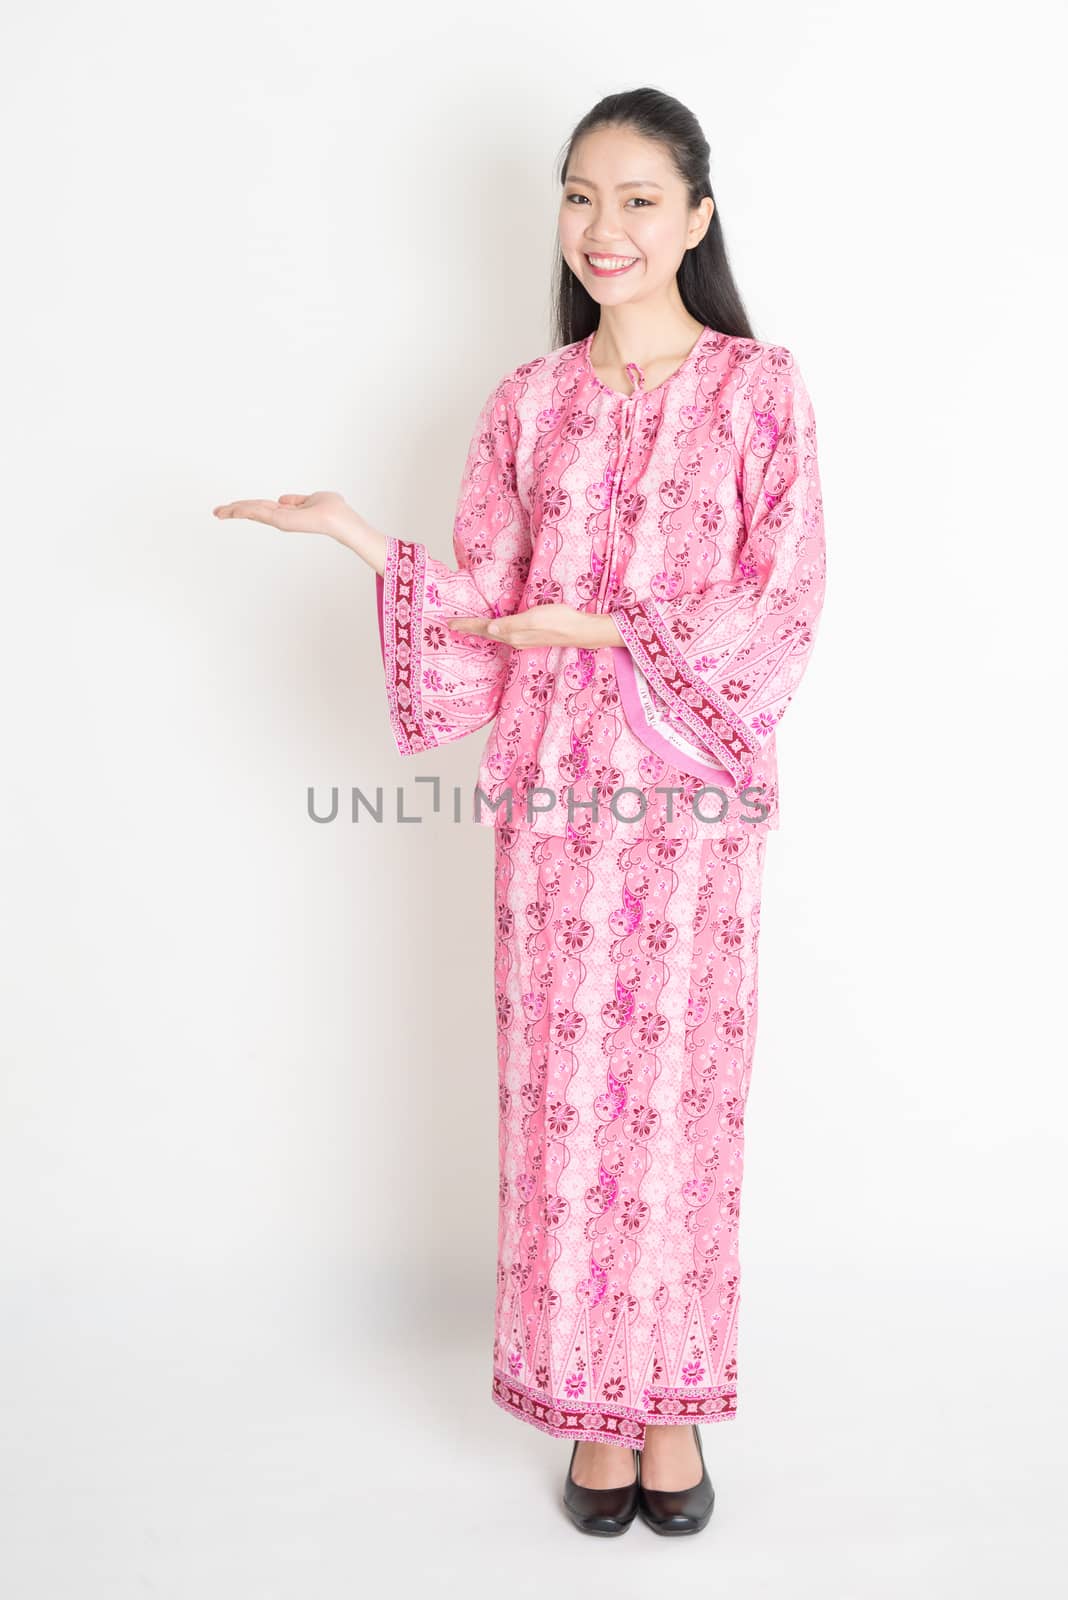 Full body portrait of happy Southeast Asian woman in pink batik dress hands showing something, standing on plain background.